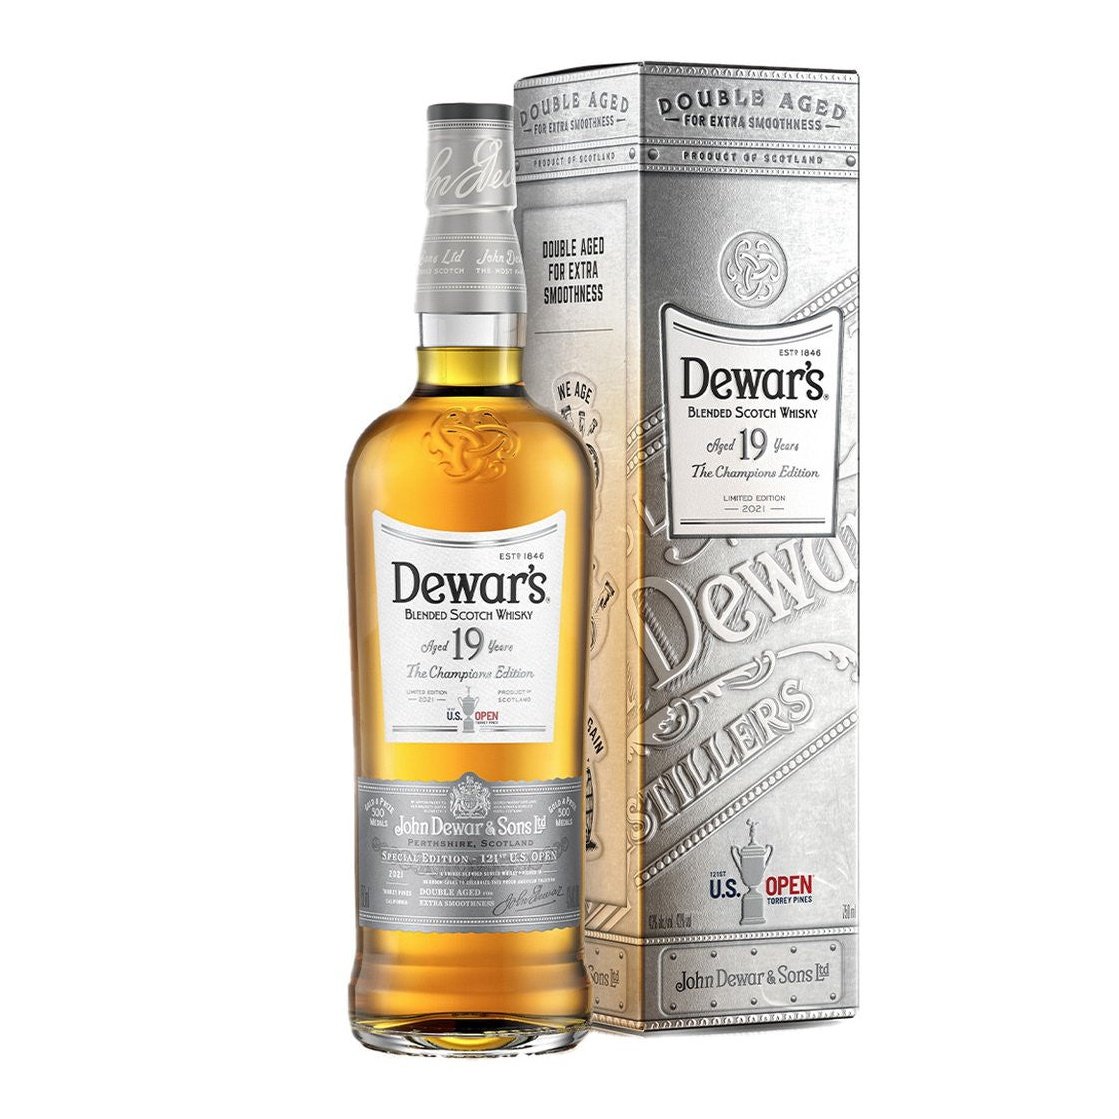 Dewar's 19 Year Old "Champions Edition" Blended Scotch Whisky 750ml